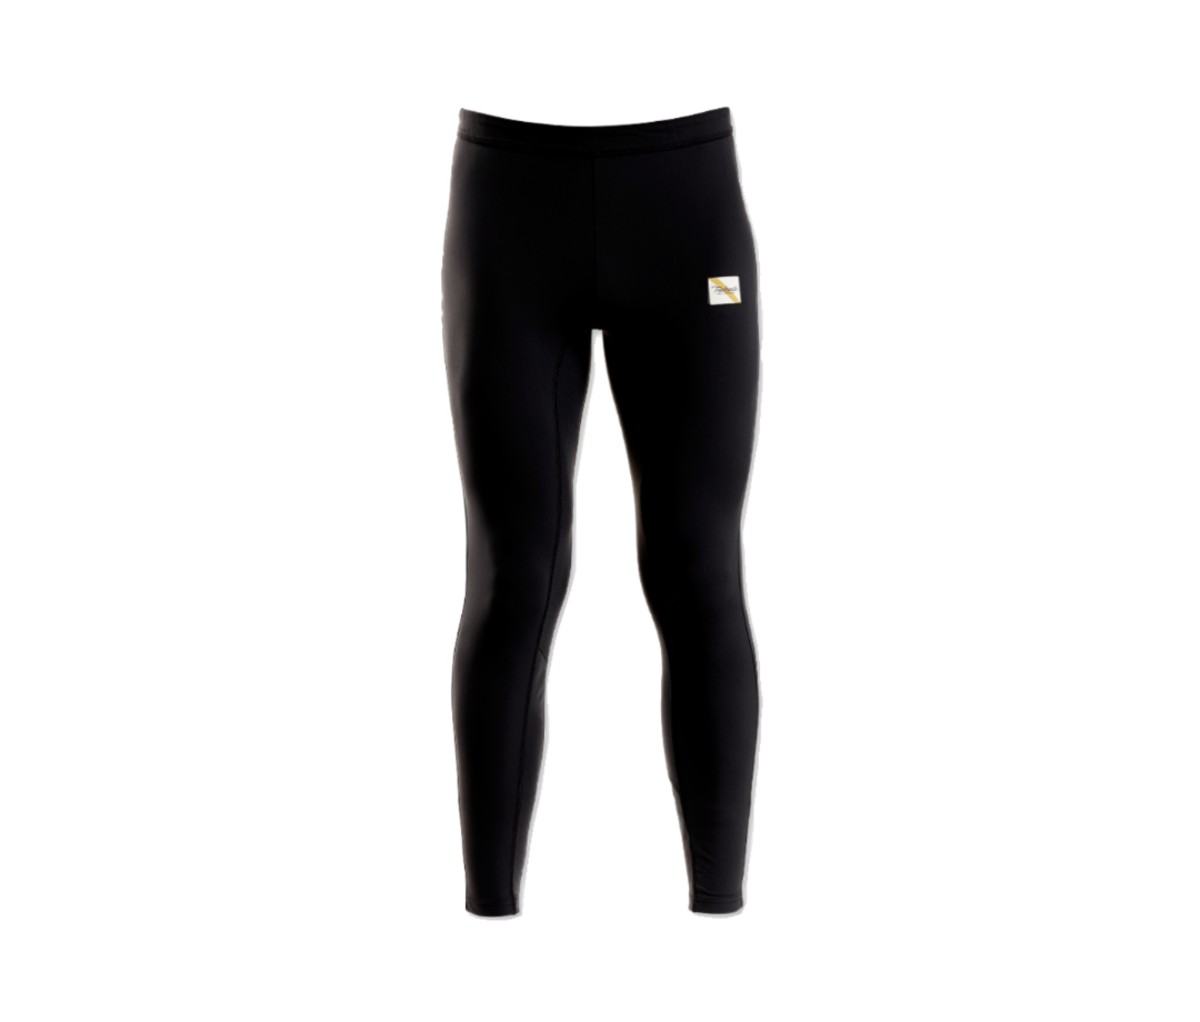 Men's Leggings For Working Out